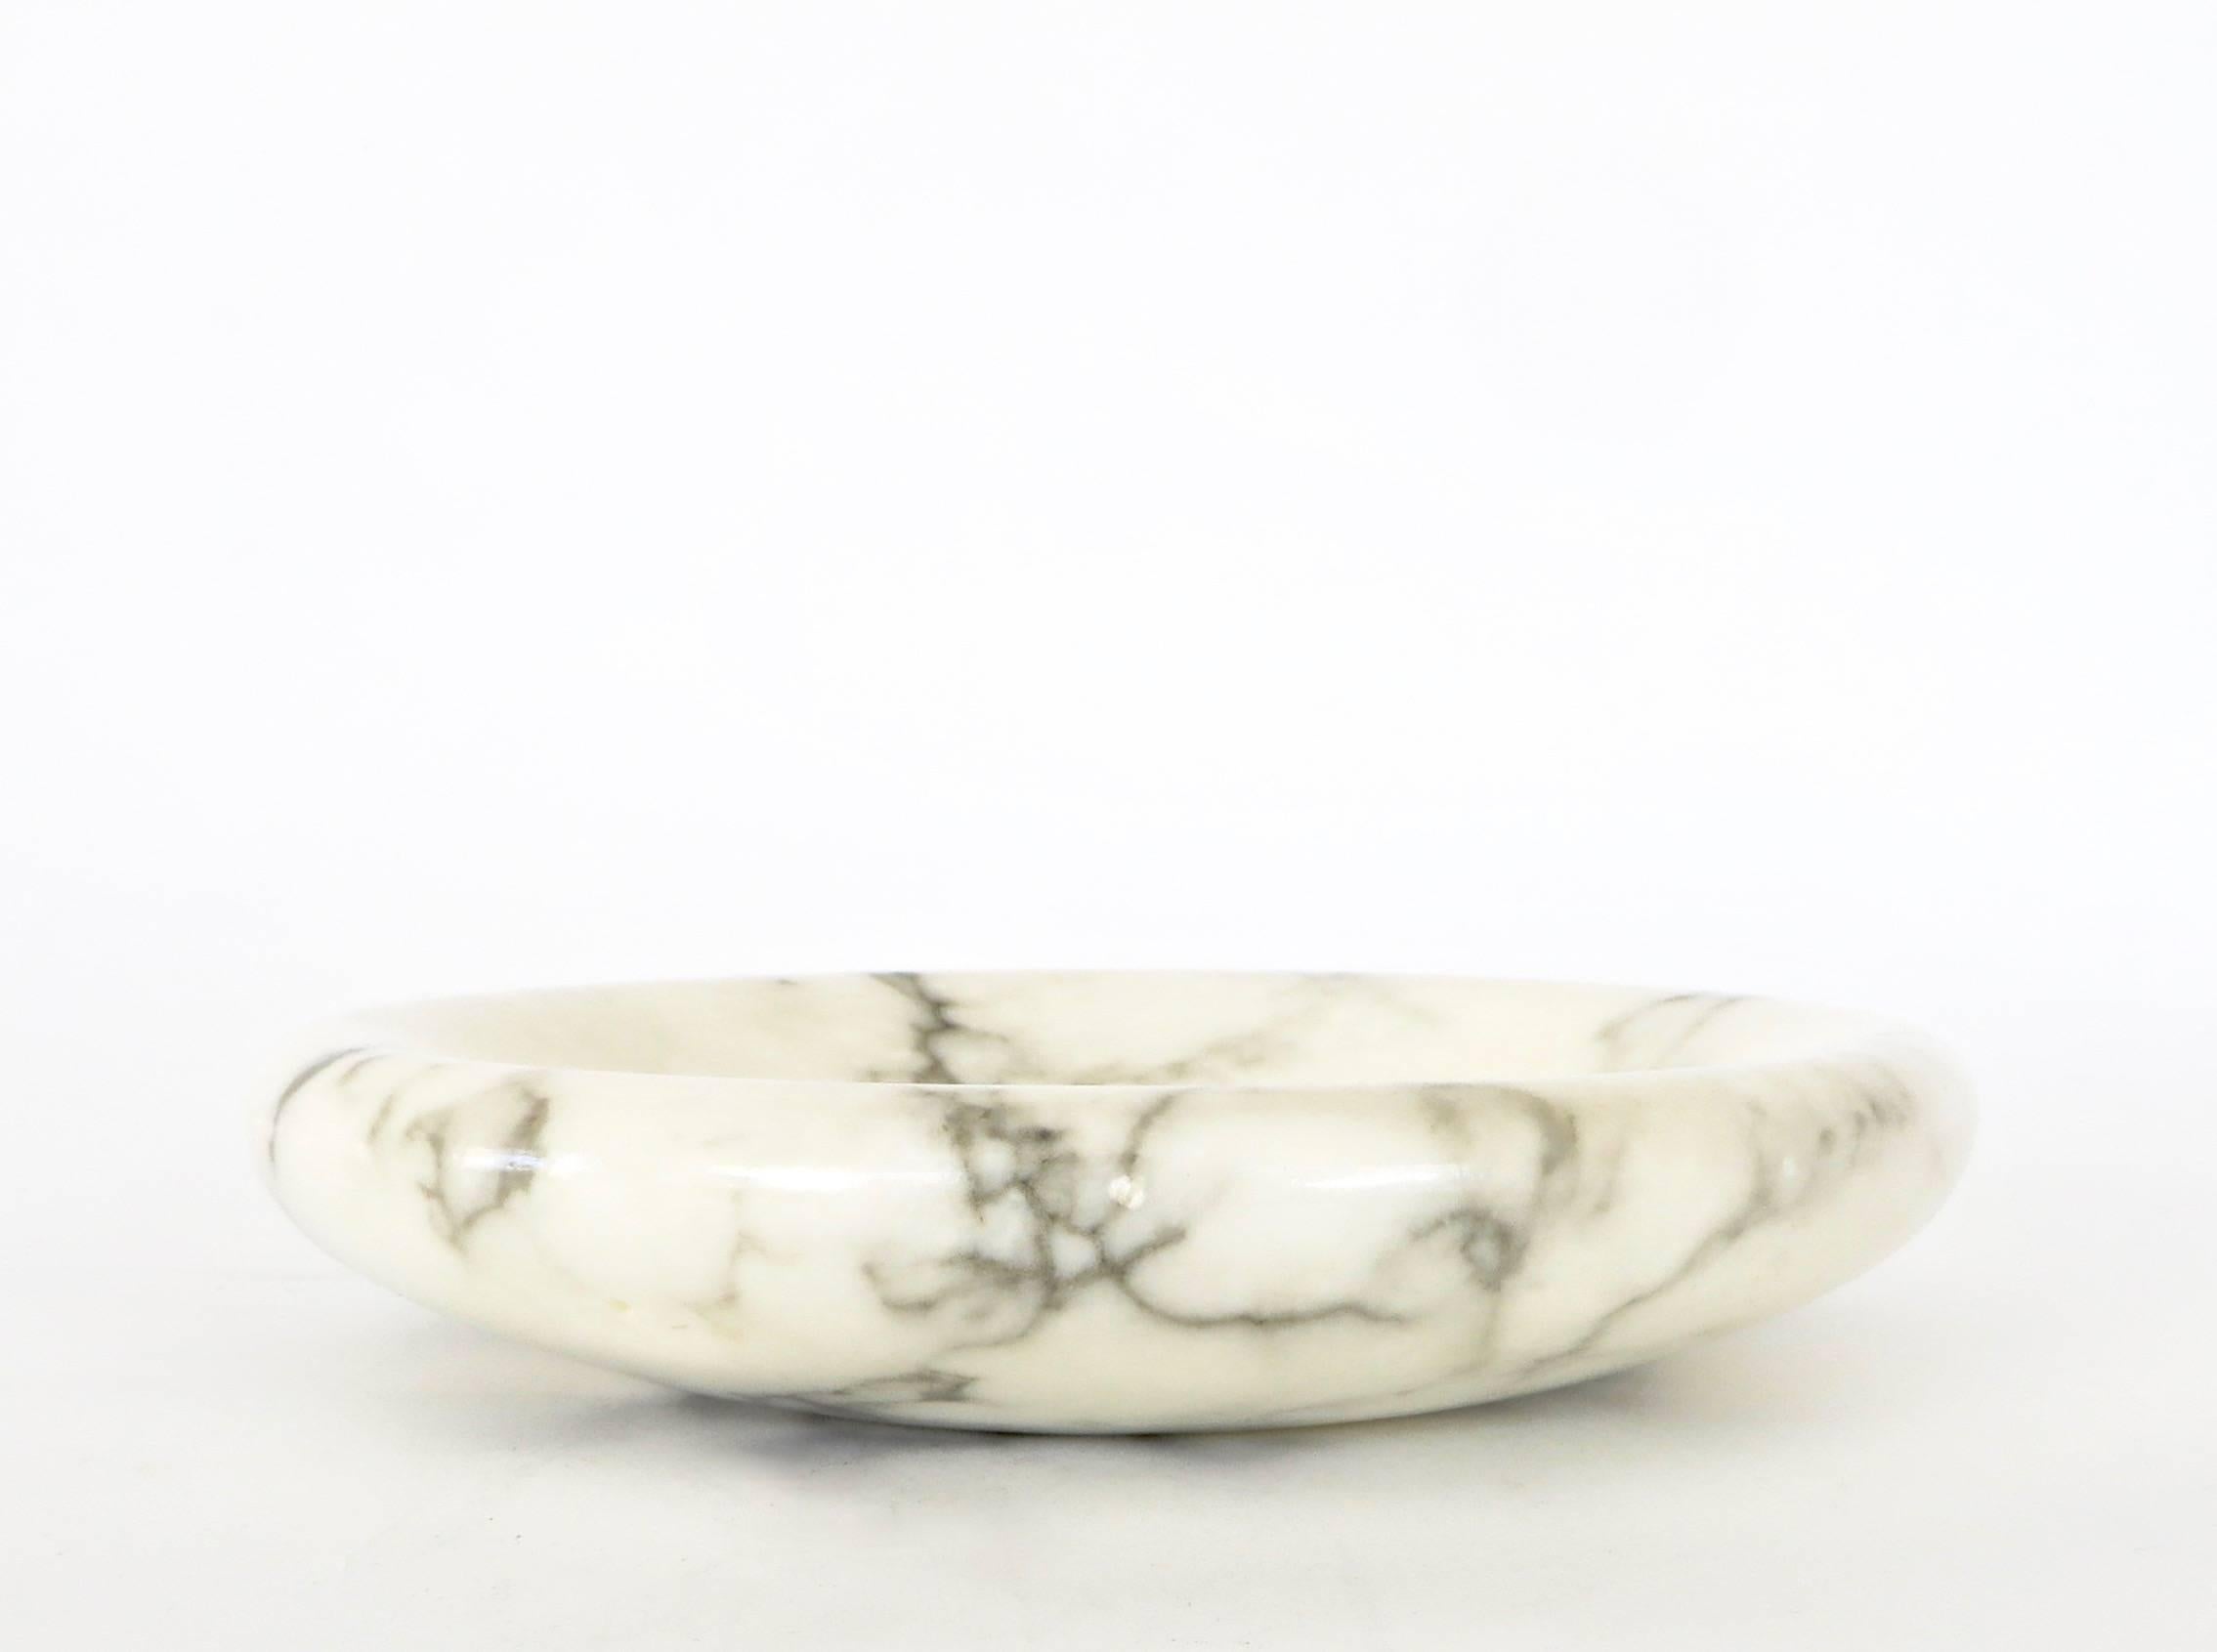 Minimal Carrara marble dish or vide poche, by Sergio Asti, Italy, circa 1970. 
Beautifully veined, with a simple rounded edge. 
Excellent condition with no chips or restorations or scratches.